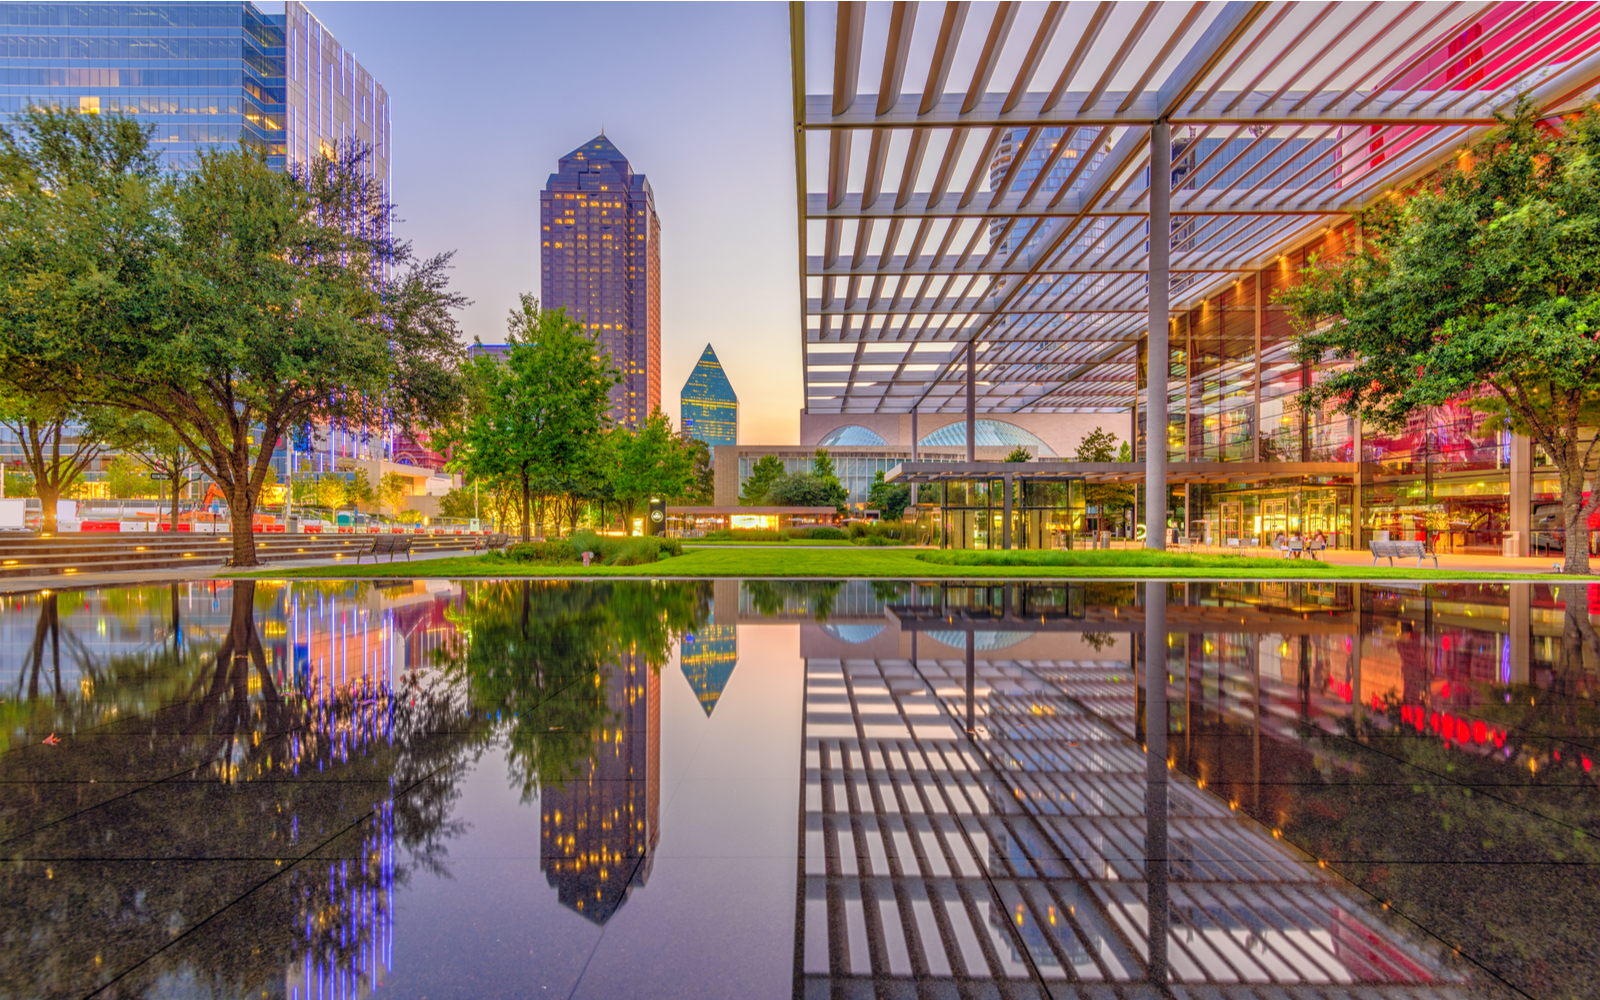 Cool view of the downtown plaza for a piece on the best things to do in Dallas Texas